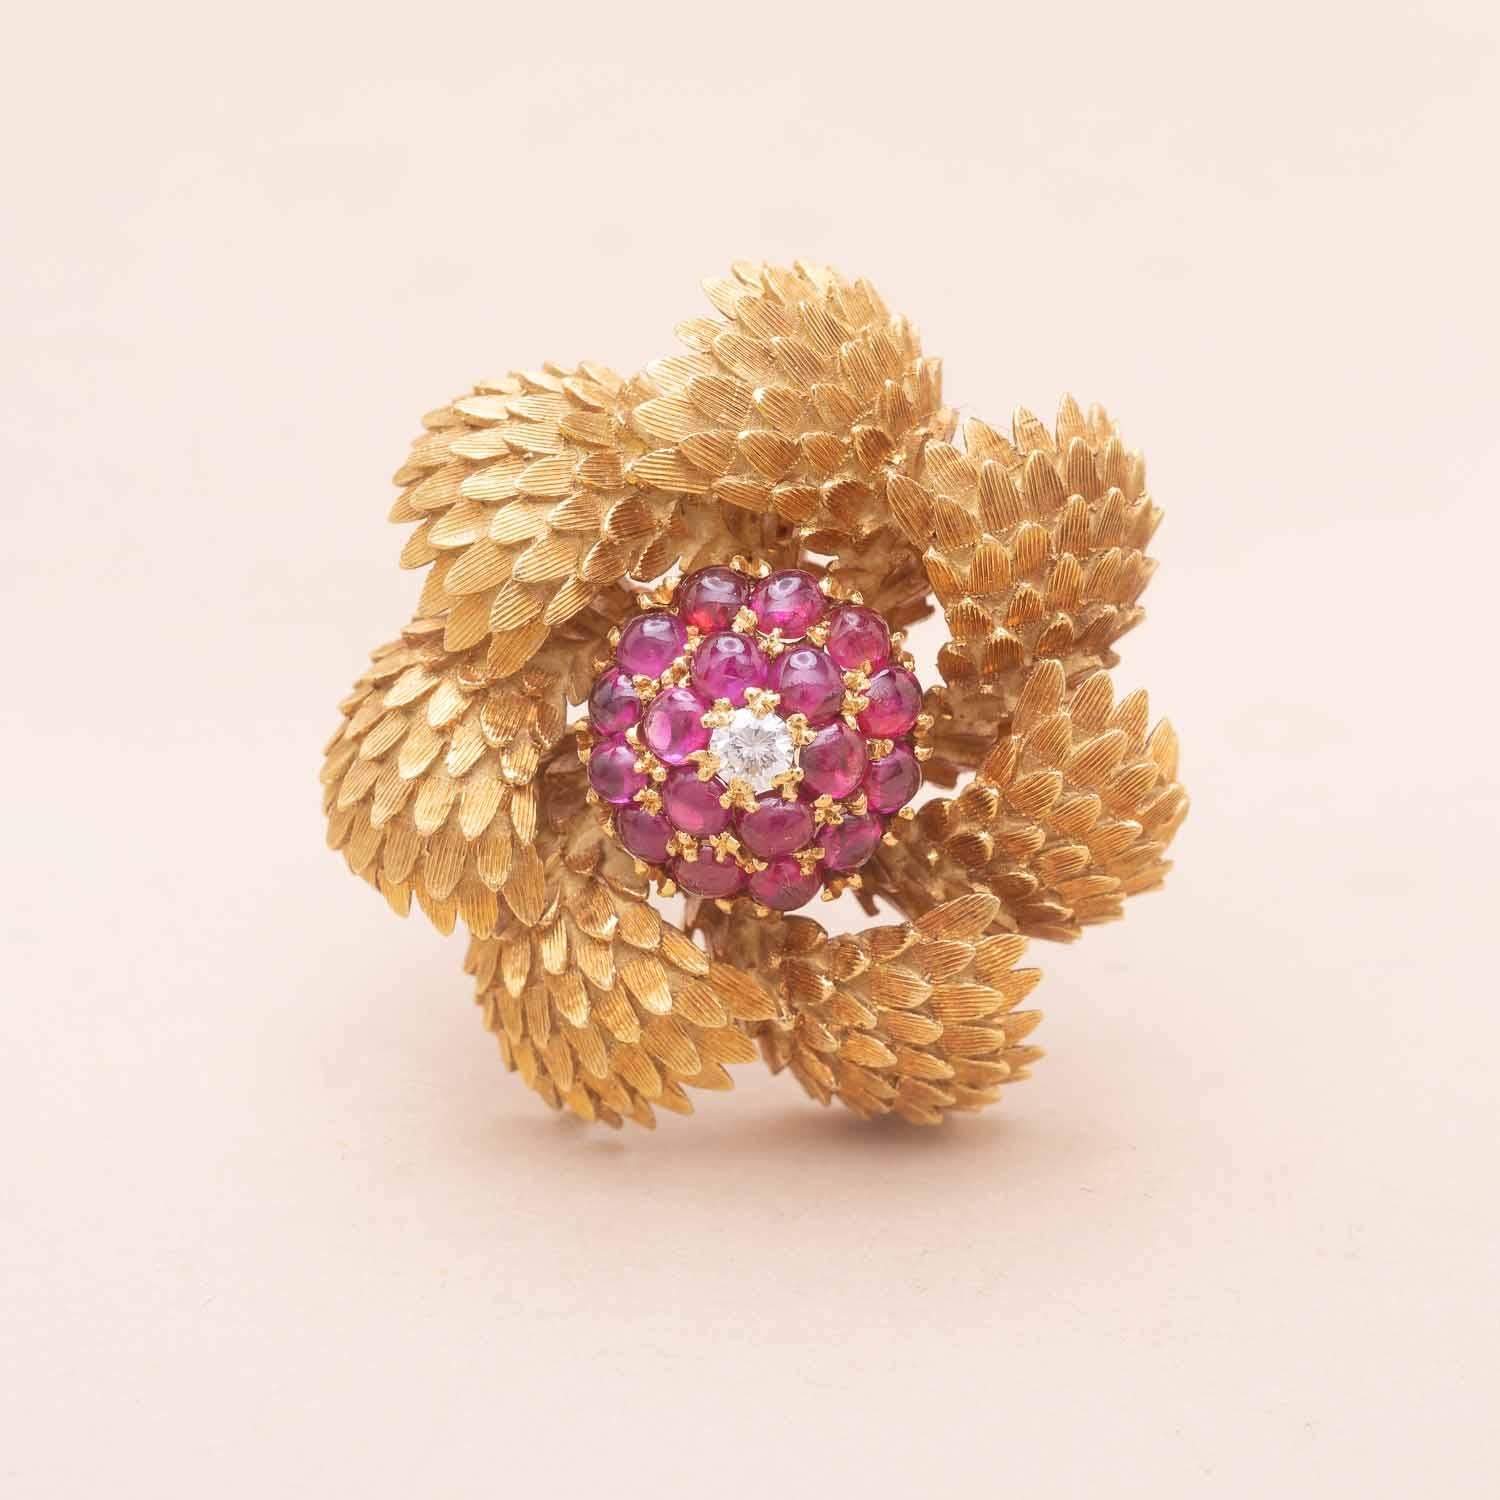 Vintage 18K gold round and spiraling brooch. Engraving forming scales centered by a round-cut diamond and cabochon-cut rubies. 
Birman, non heated rubies 
Diamond's weight : 0.16 carat
1970s Italian Craftsmanship 
750 and weevil hallmark 
Diameter :